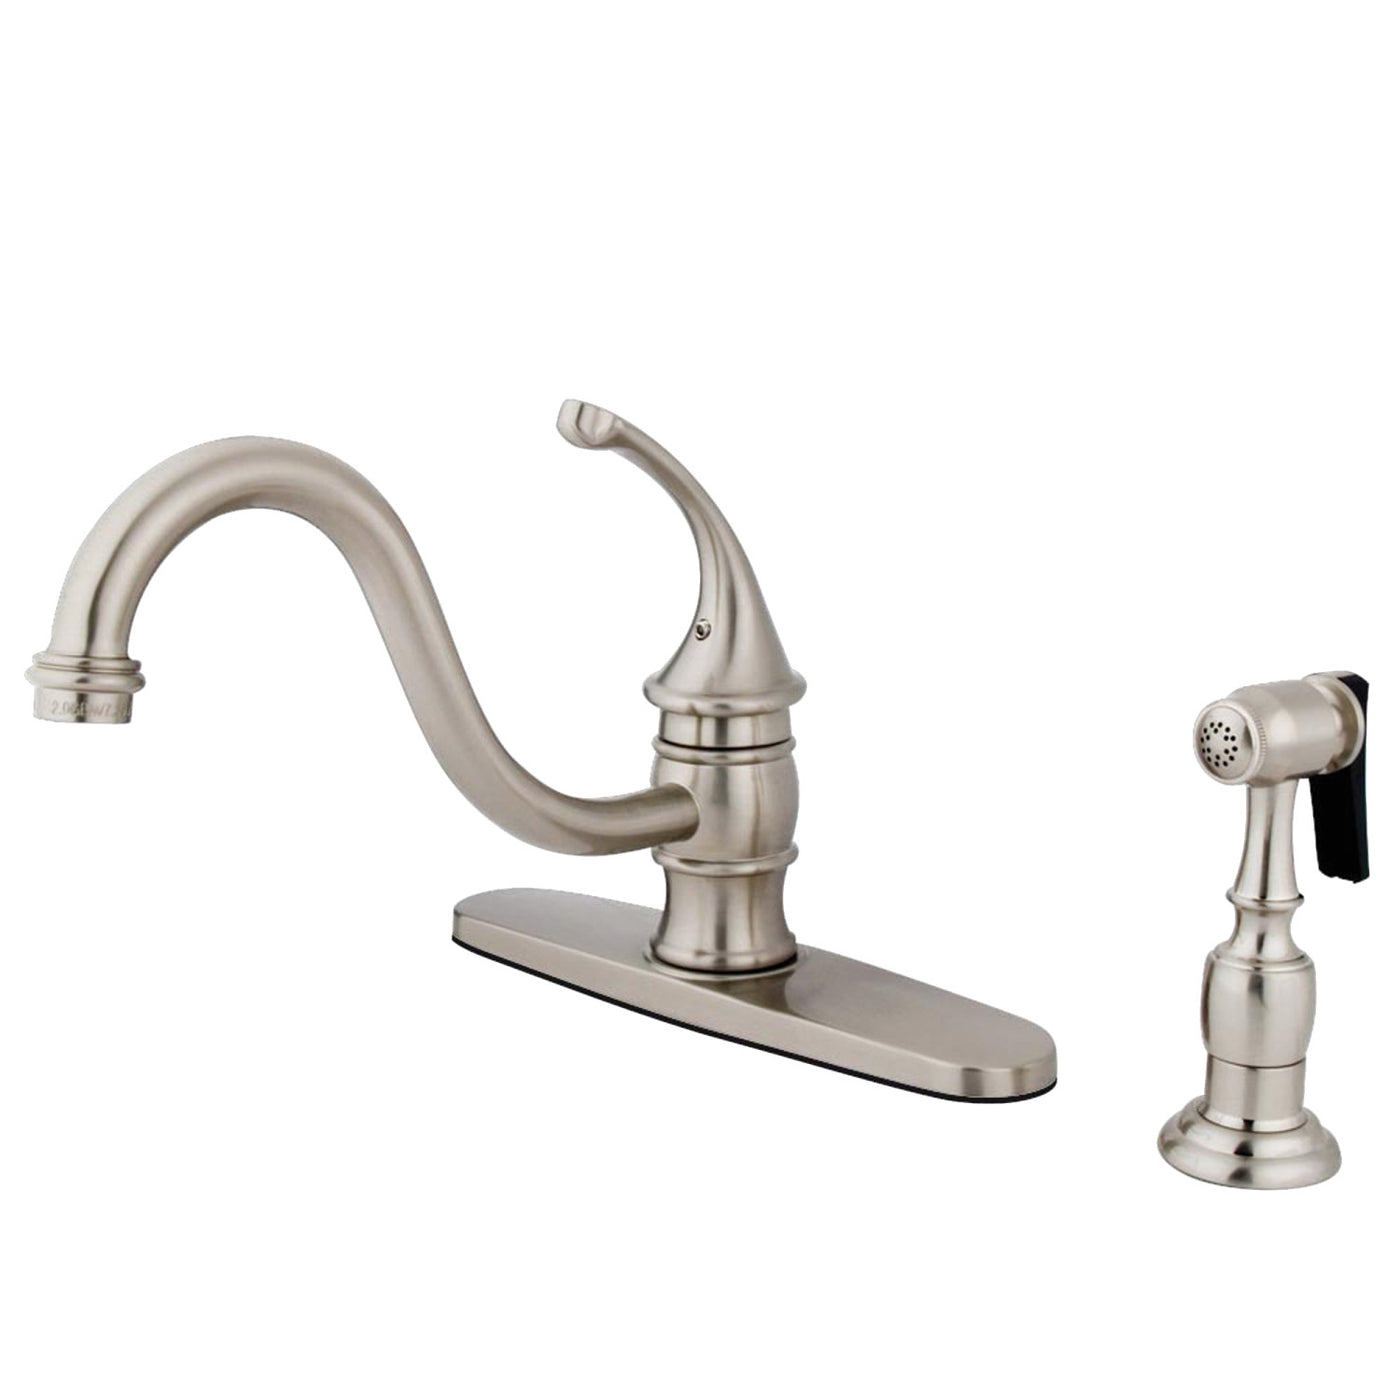 Elements of Design EB3578GLBS Single-Handle Kitchen Faucet with Brass Sprayer, Brushed Nickel